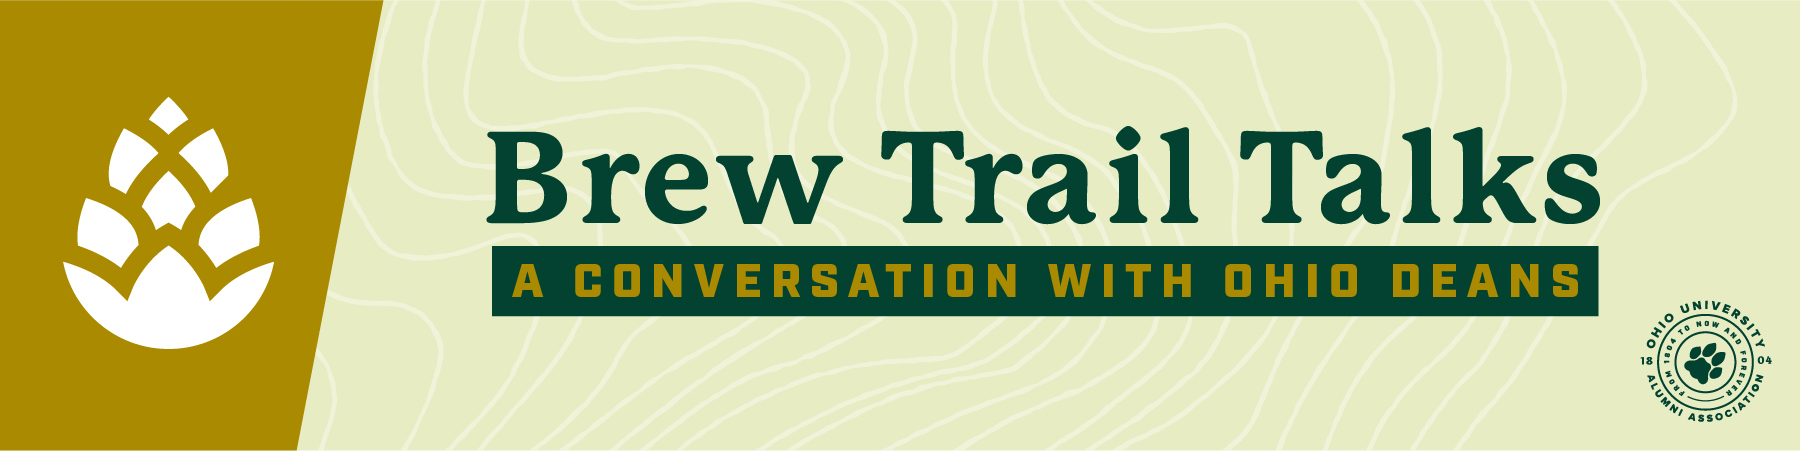 Graphic with text, "Brew Trail Talks, A Conversation with OHIO Deans."